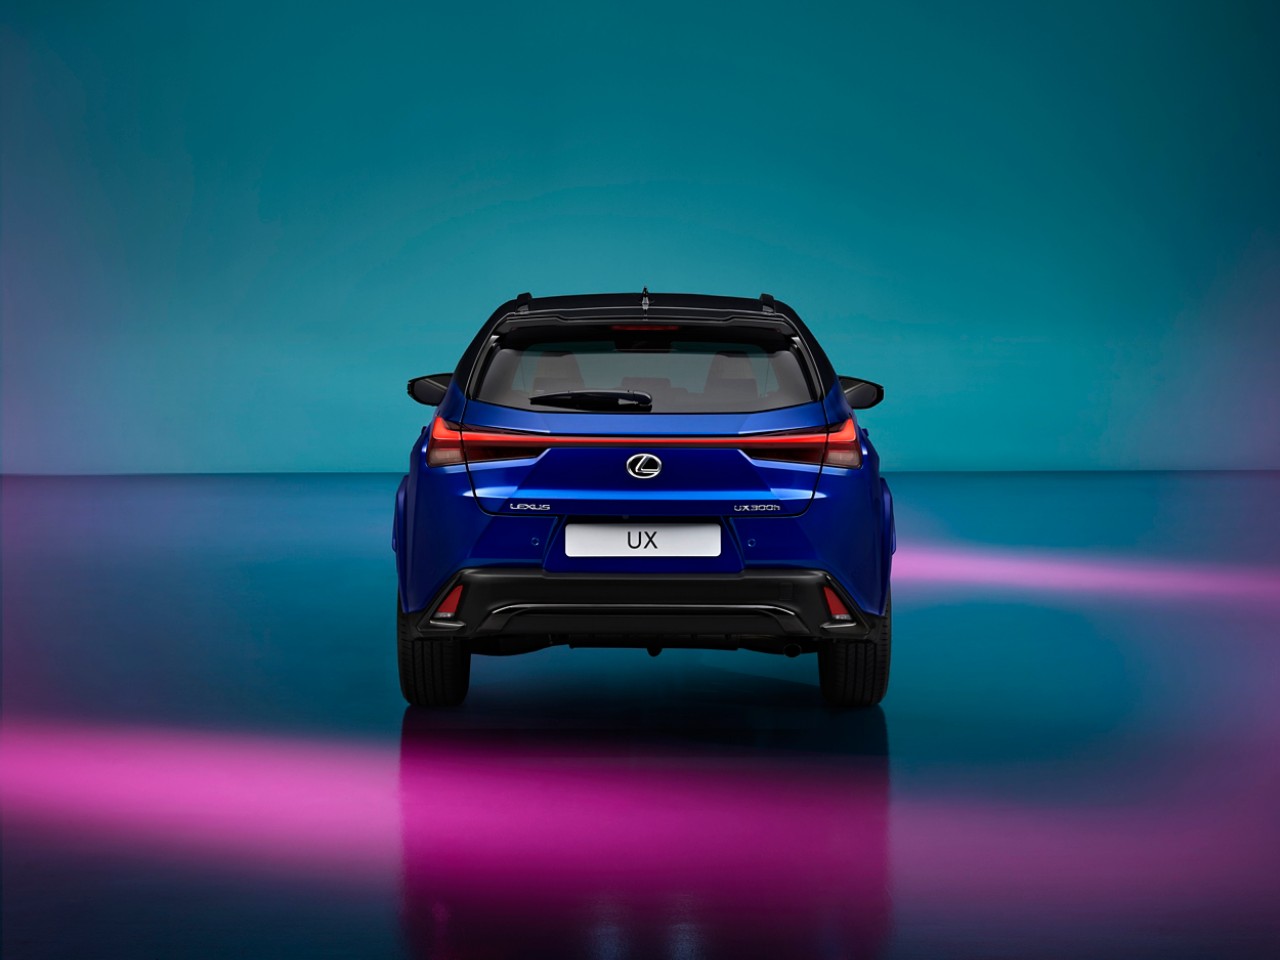 Rear view of the Lexus UX